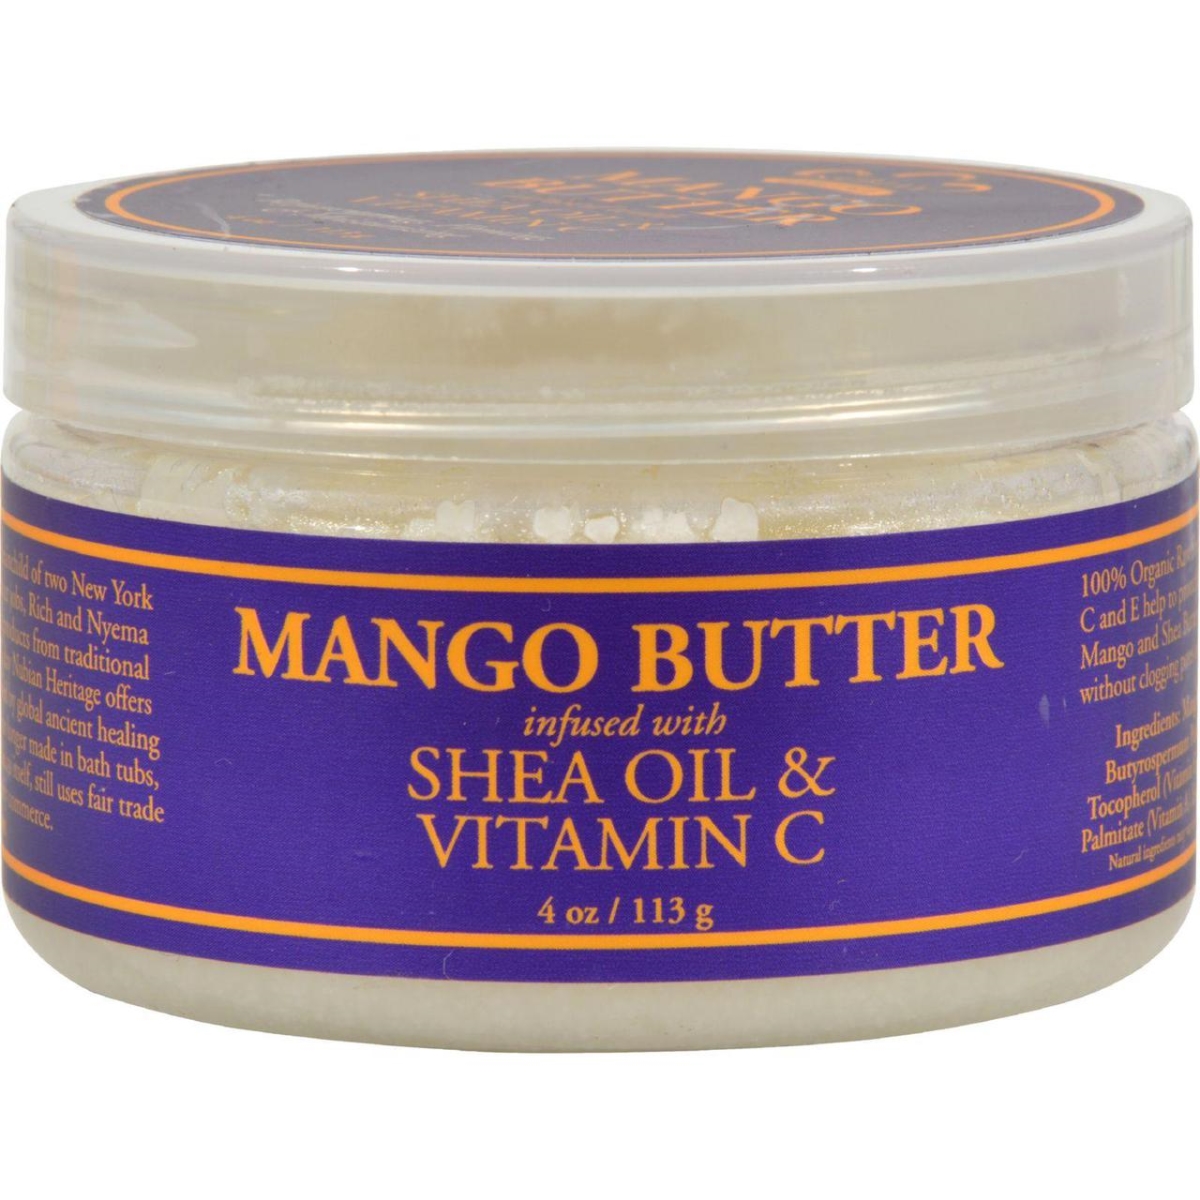 Hg0567784 4 Oz Mango Butter Infused With Shea Oil & Vitamin C